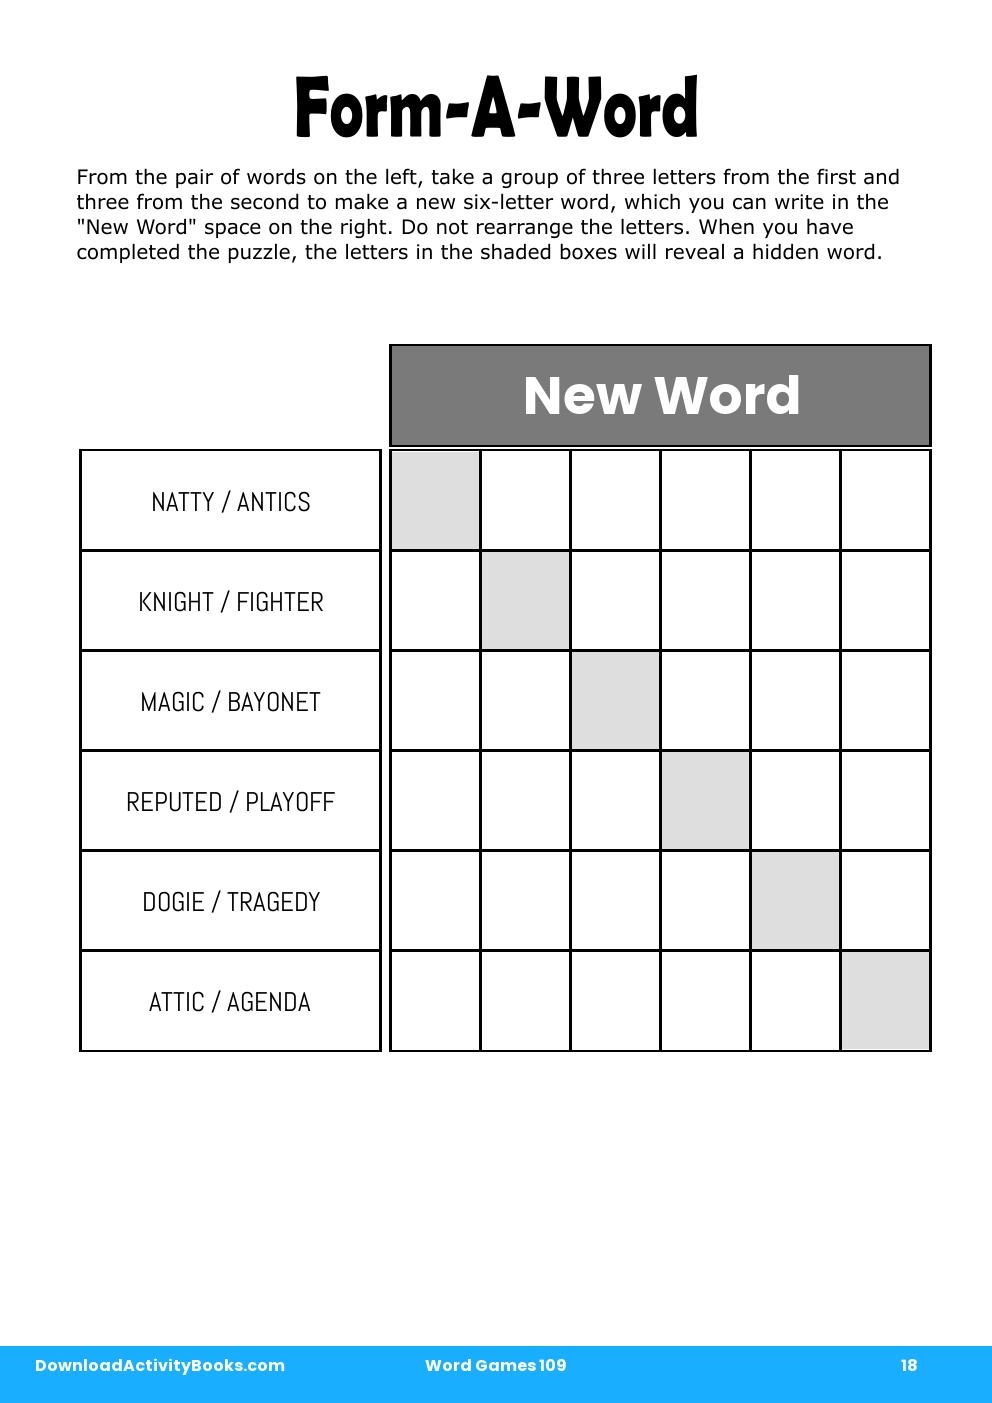 Form-A-Word in Word Games 109